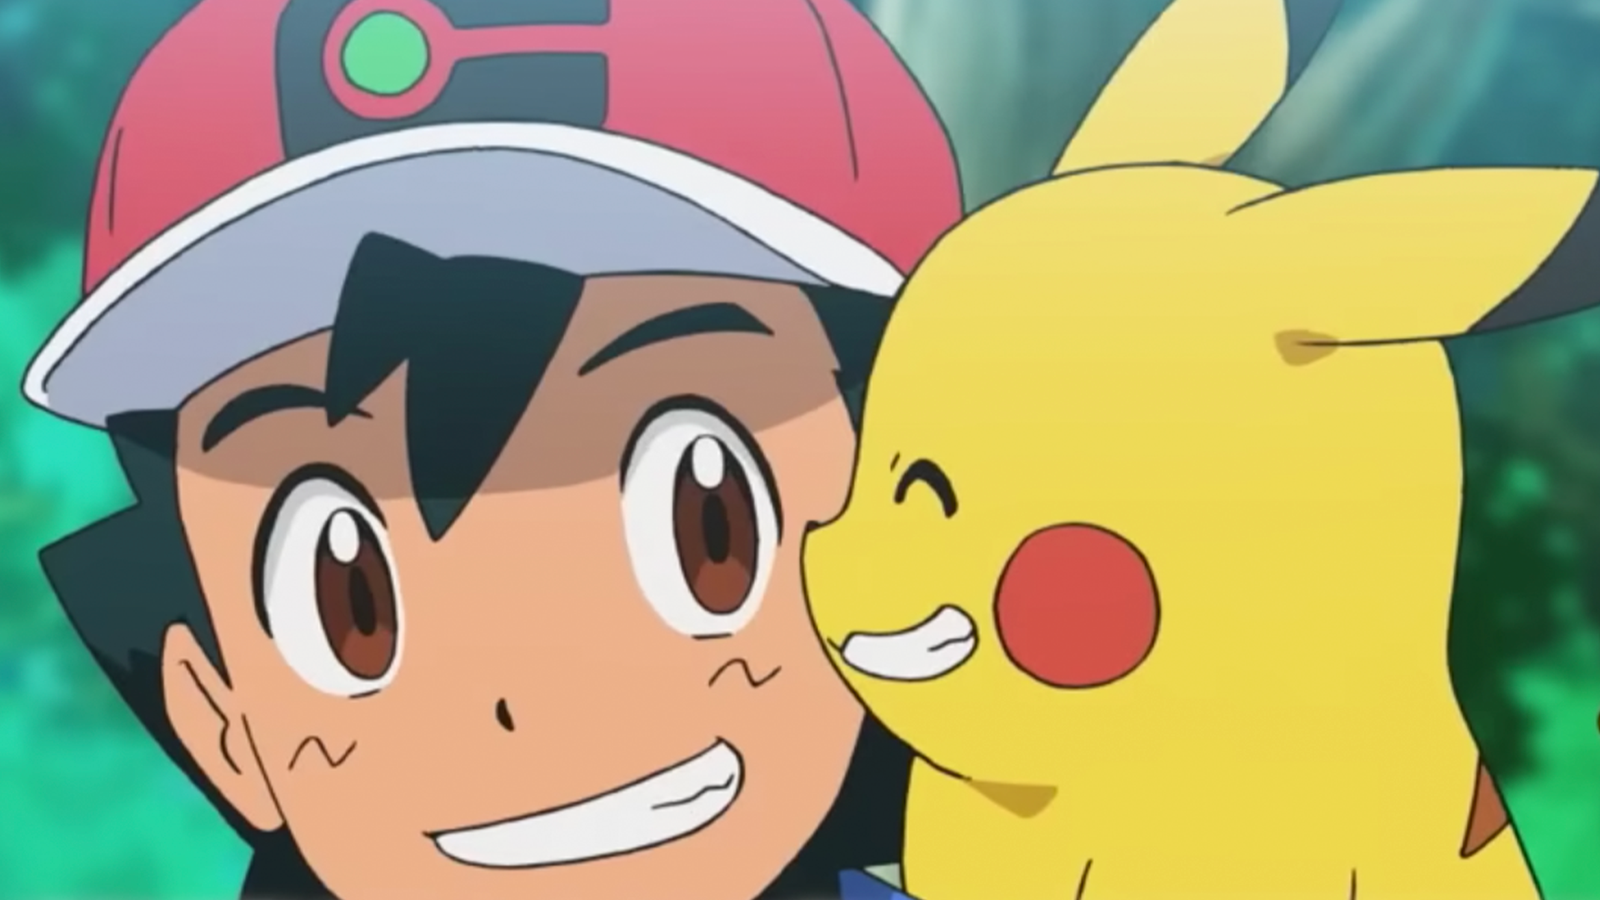 Pokémon fans are snapping up trading cards with Ash and Pikachu ...